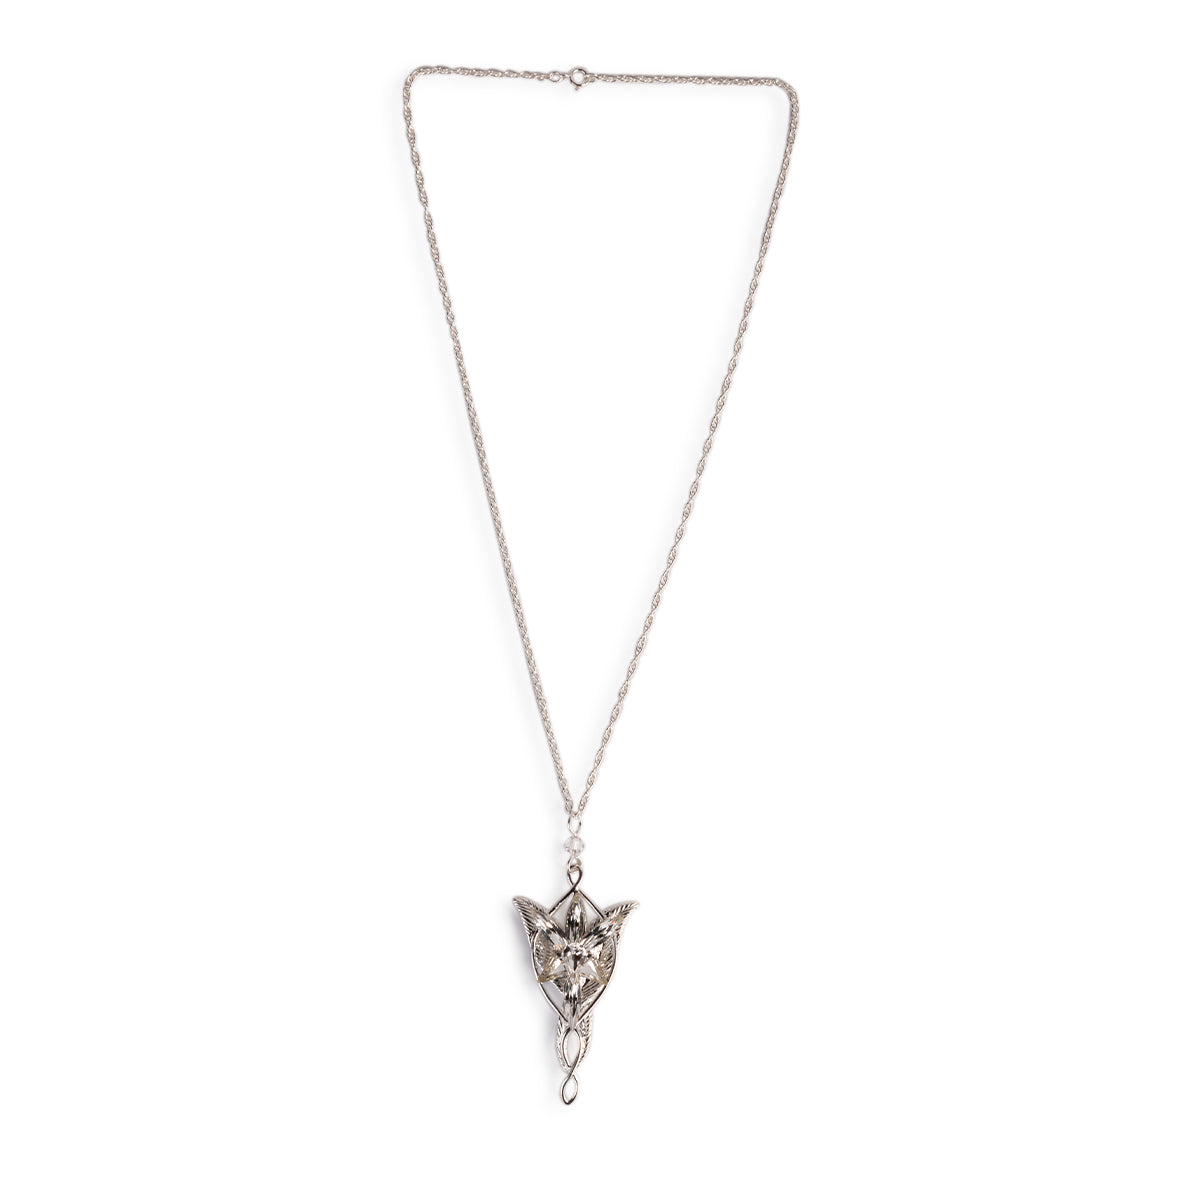 The Lord of the Rings The Evenstar Pendant of Arwen